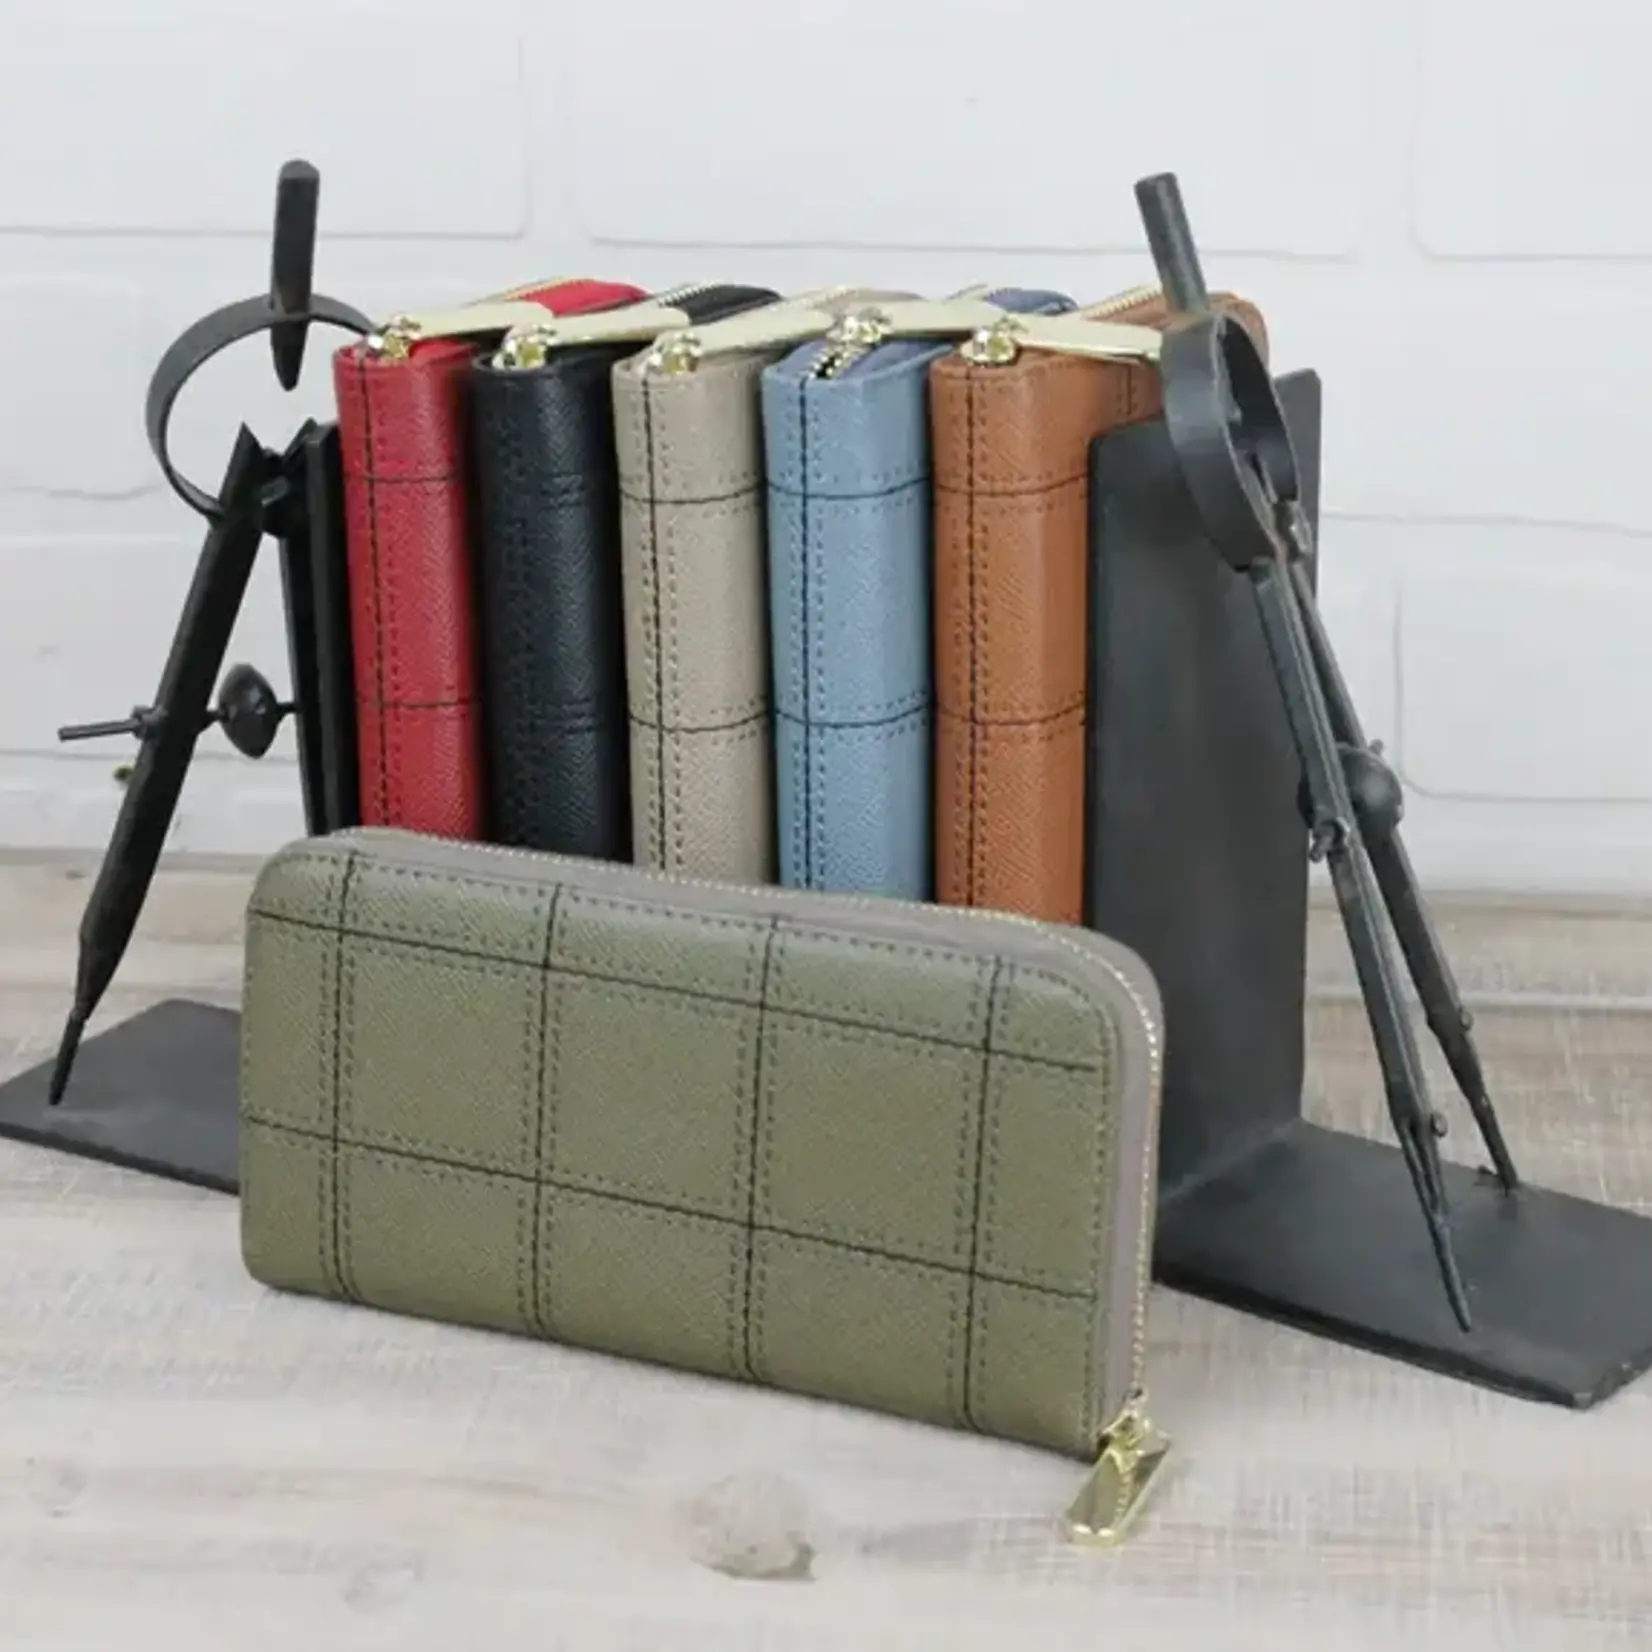 Cambridge Wallet Collectionc - Assorted